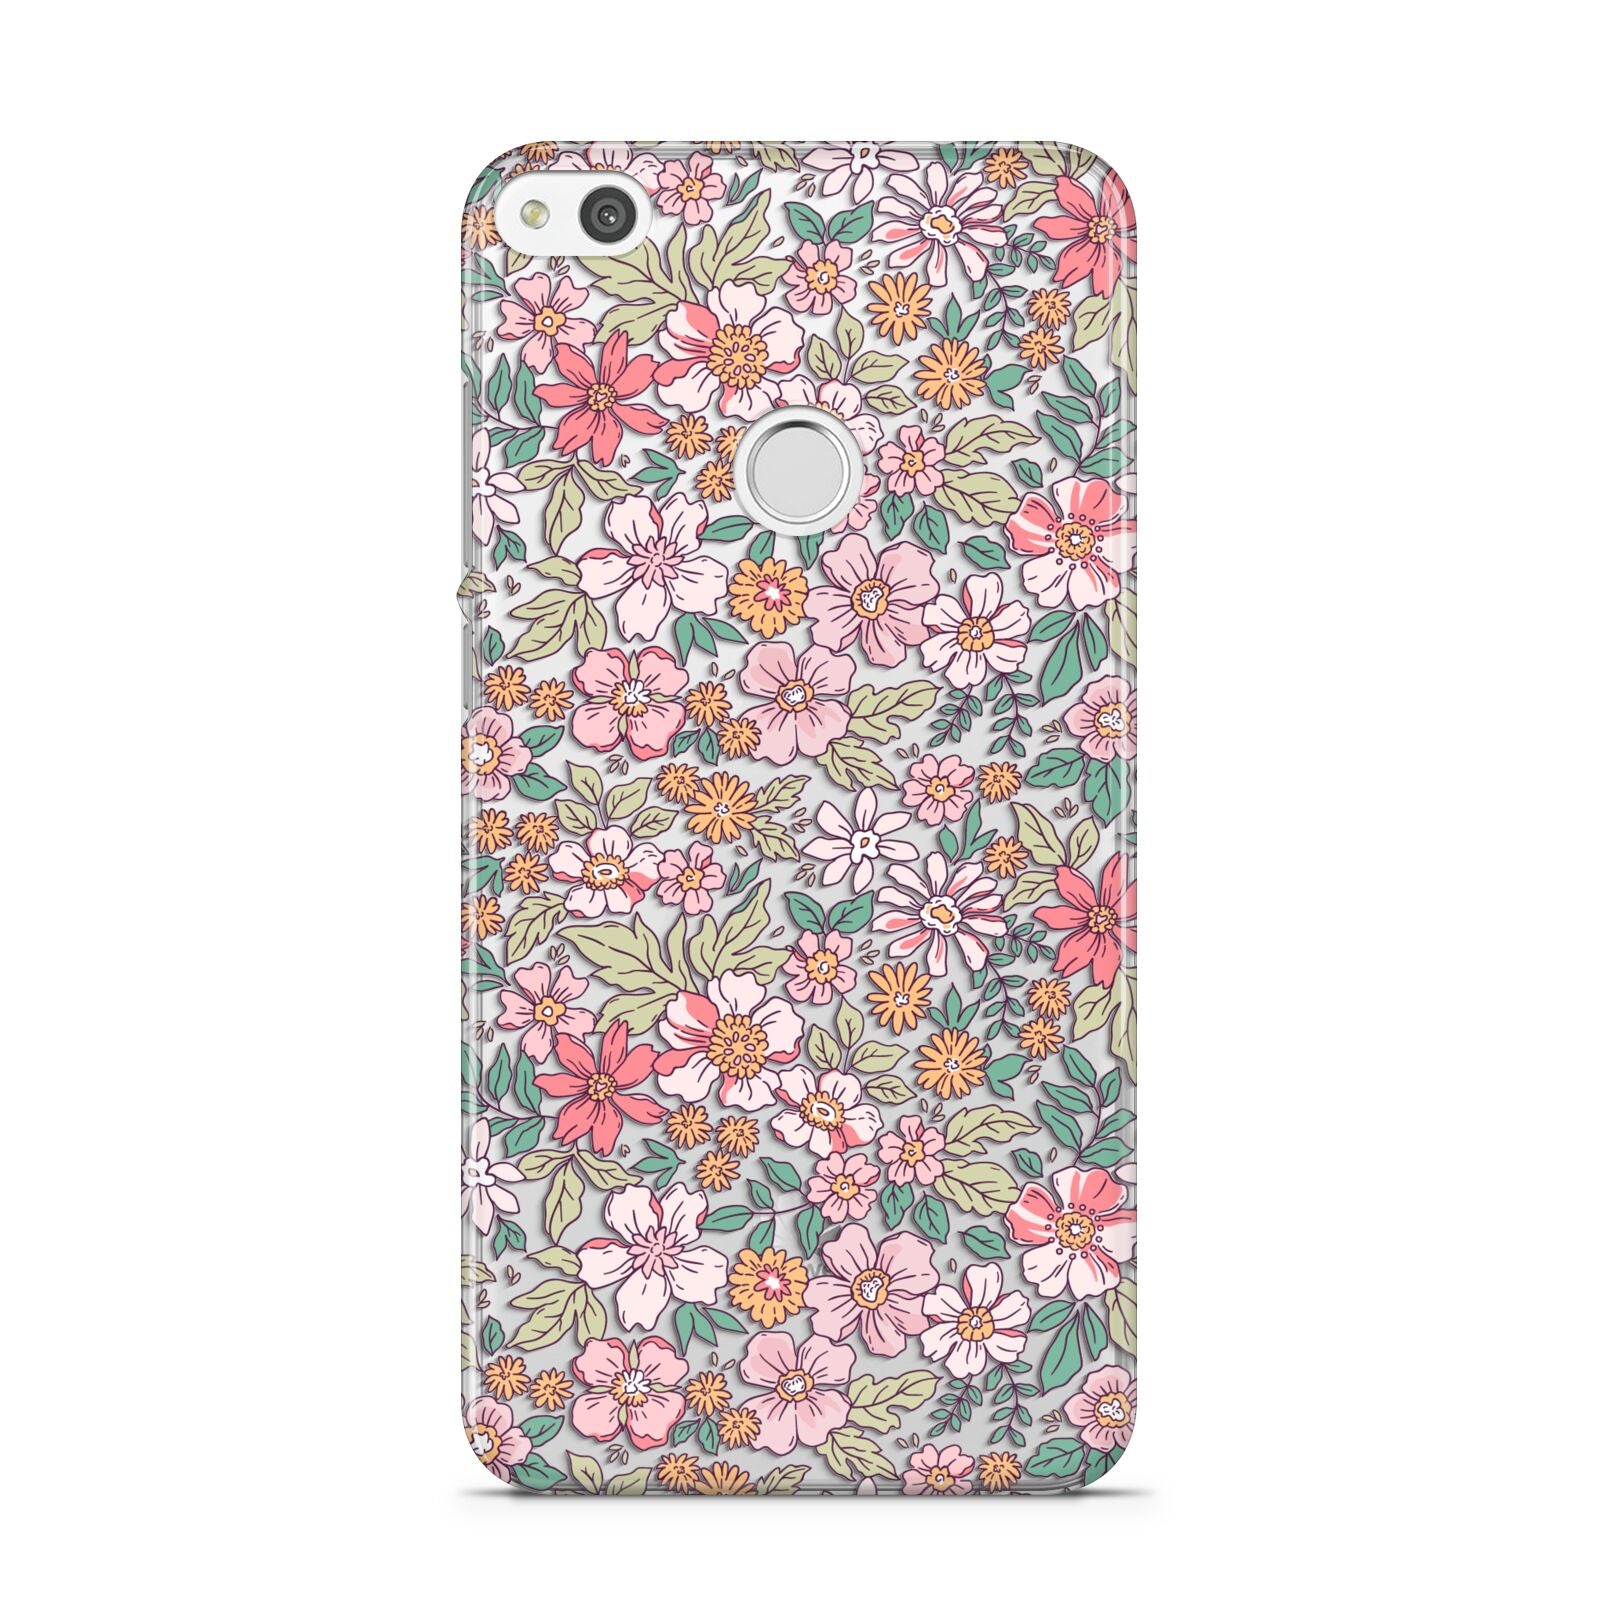 Small Floral Pattern Huawei P8 Lite Case